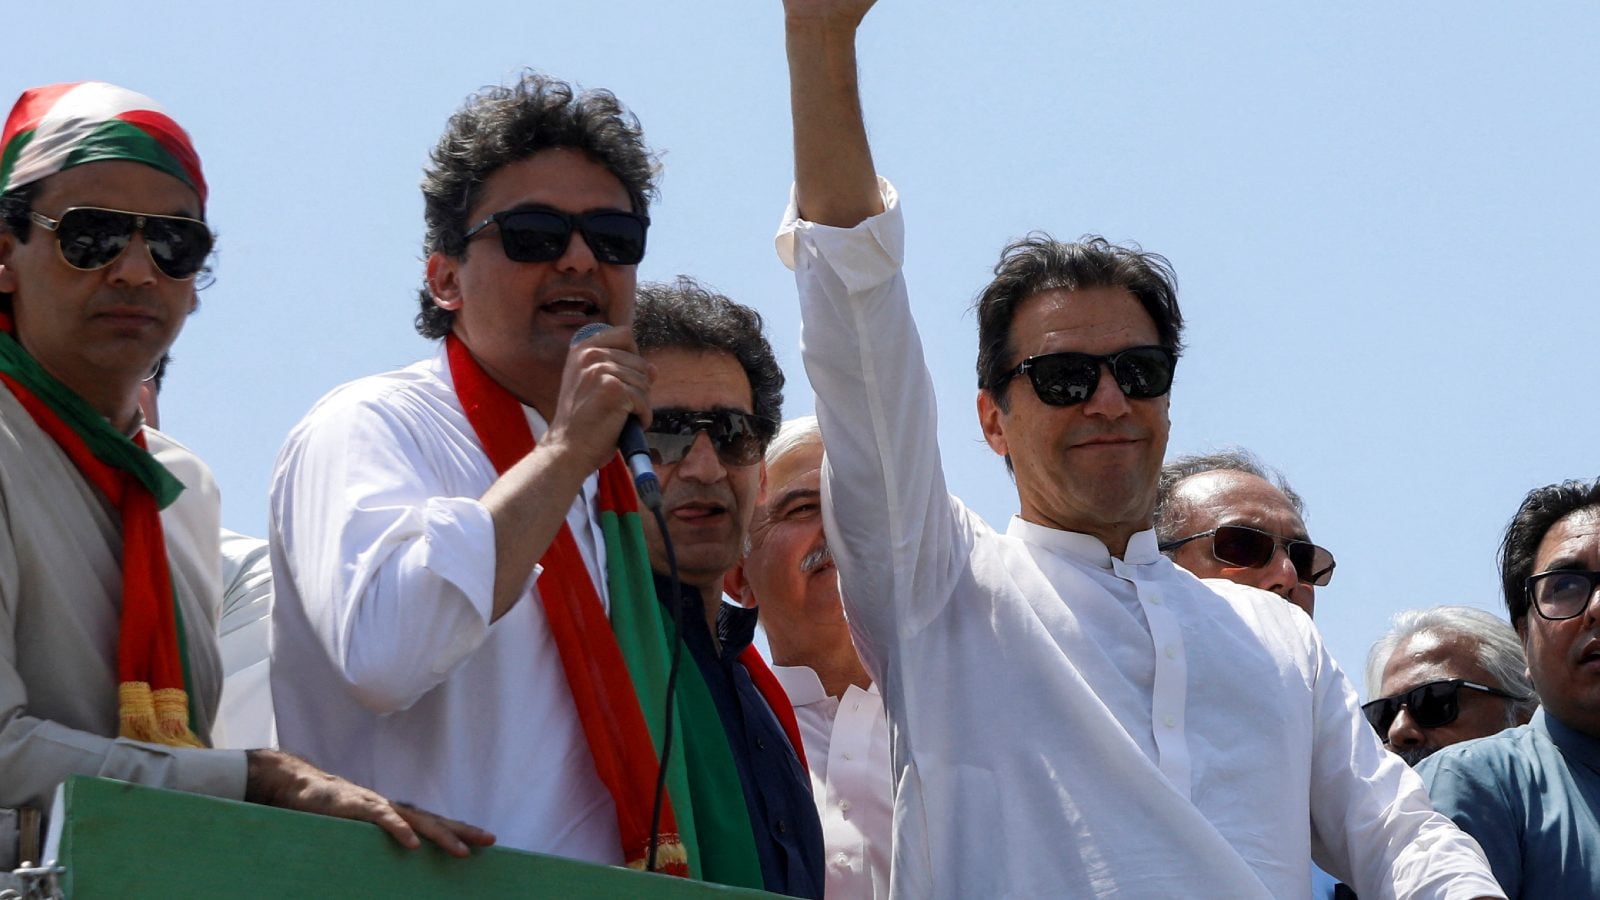 attack-on-imran-underscores-pakistan-s-deepening-crisis-with-political-class-in-firing-line